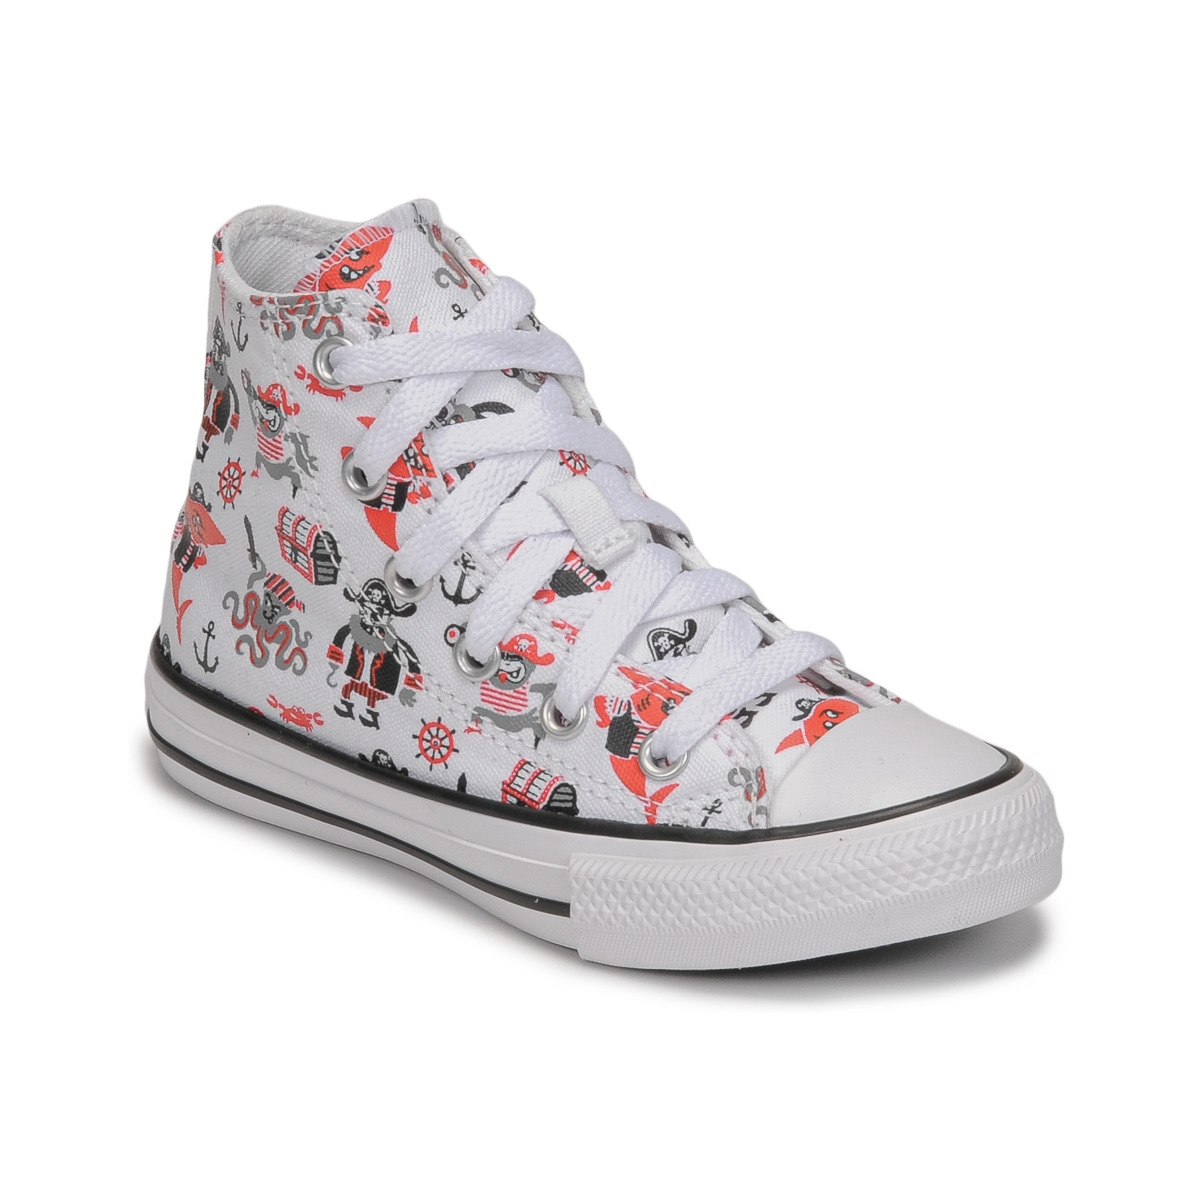 Converse Blanc / Rouge CHUCK TAYLOR ALL STAR PIRATES COVE HI fTImO6BE